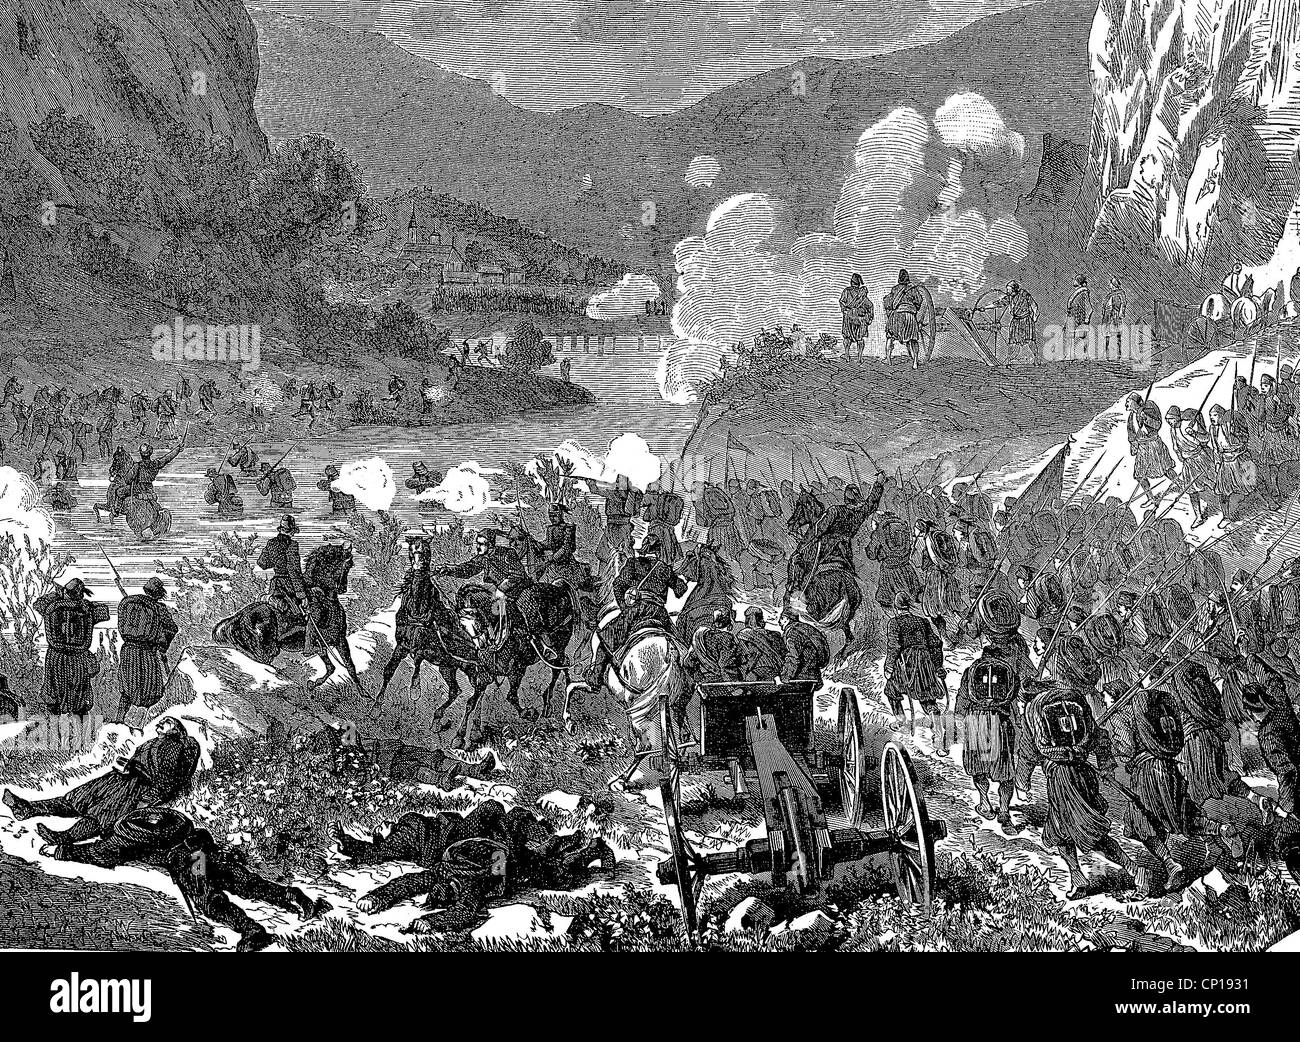 events, War on the Balkans 1876 - 1878, Battle of Zajecar, 7.8.1876, Osman Nuri Pasha defeating the Serbs, contemporary wood engraving, Balkan Crisis, Ottoman Empire, Turks, army, troops, Serbia, soldiers, attack, fight, fighting, infantry, artillery, river, historic, historical, 19th century, people, Additional-Rights-Clearences-Not Available Stock Photo